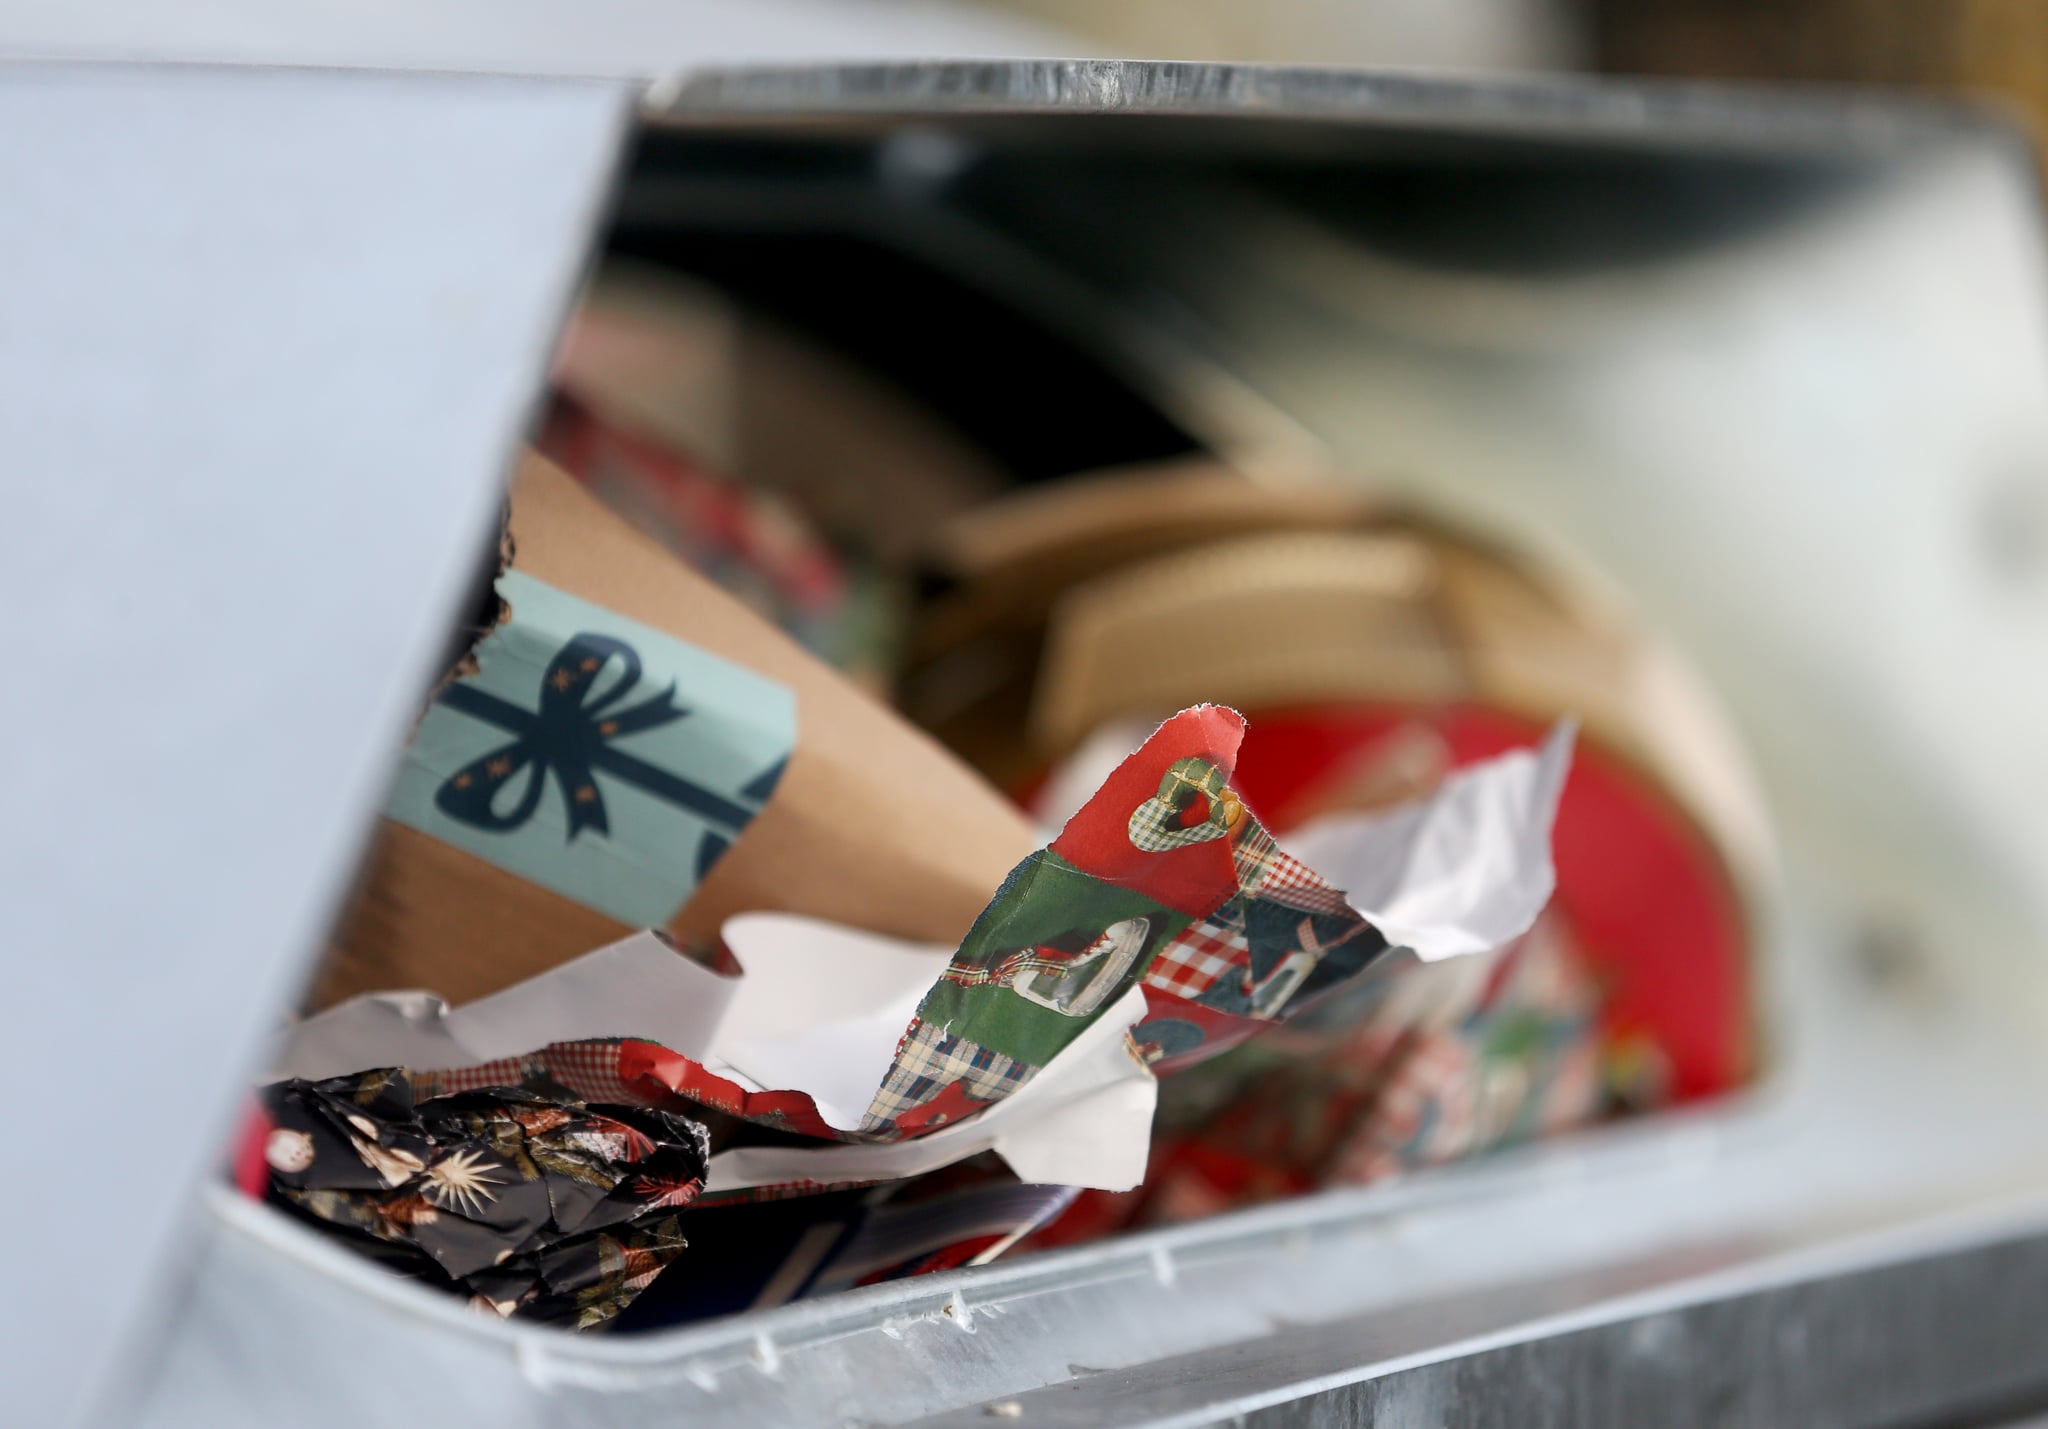 27 December 2018, North Rhine-Westphalia, Essen: A garbage container is filled to the brim with Christmas gift paper. If the wrapping paper is made of coated paper, it should be disposed of in the yellow bin. Photo: Roland Weihrauch/dpa (Photo by Roland Weihrauch/picture alliance via Getty Images)